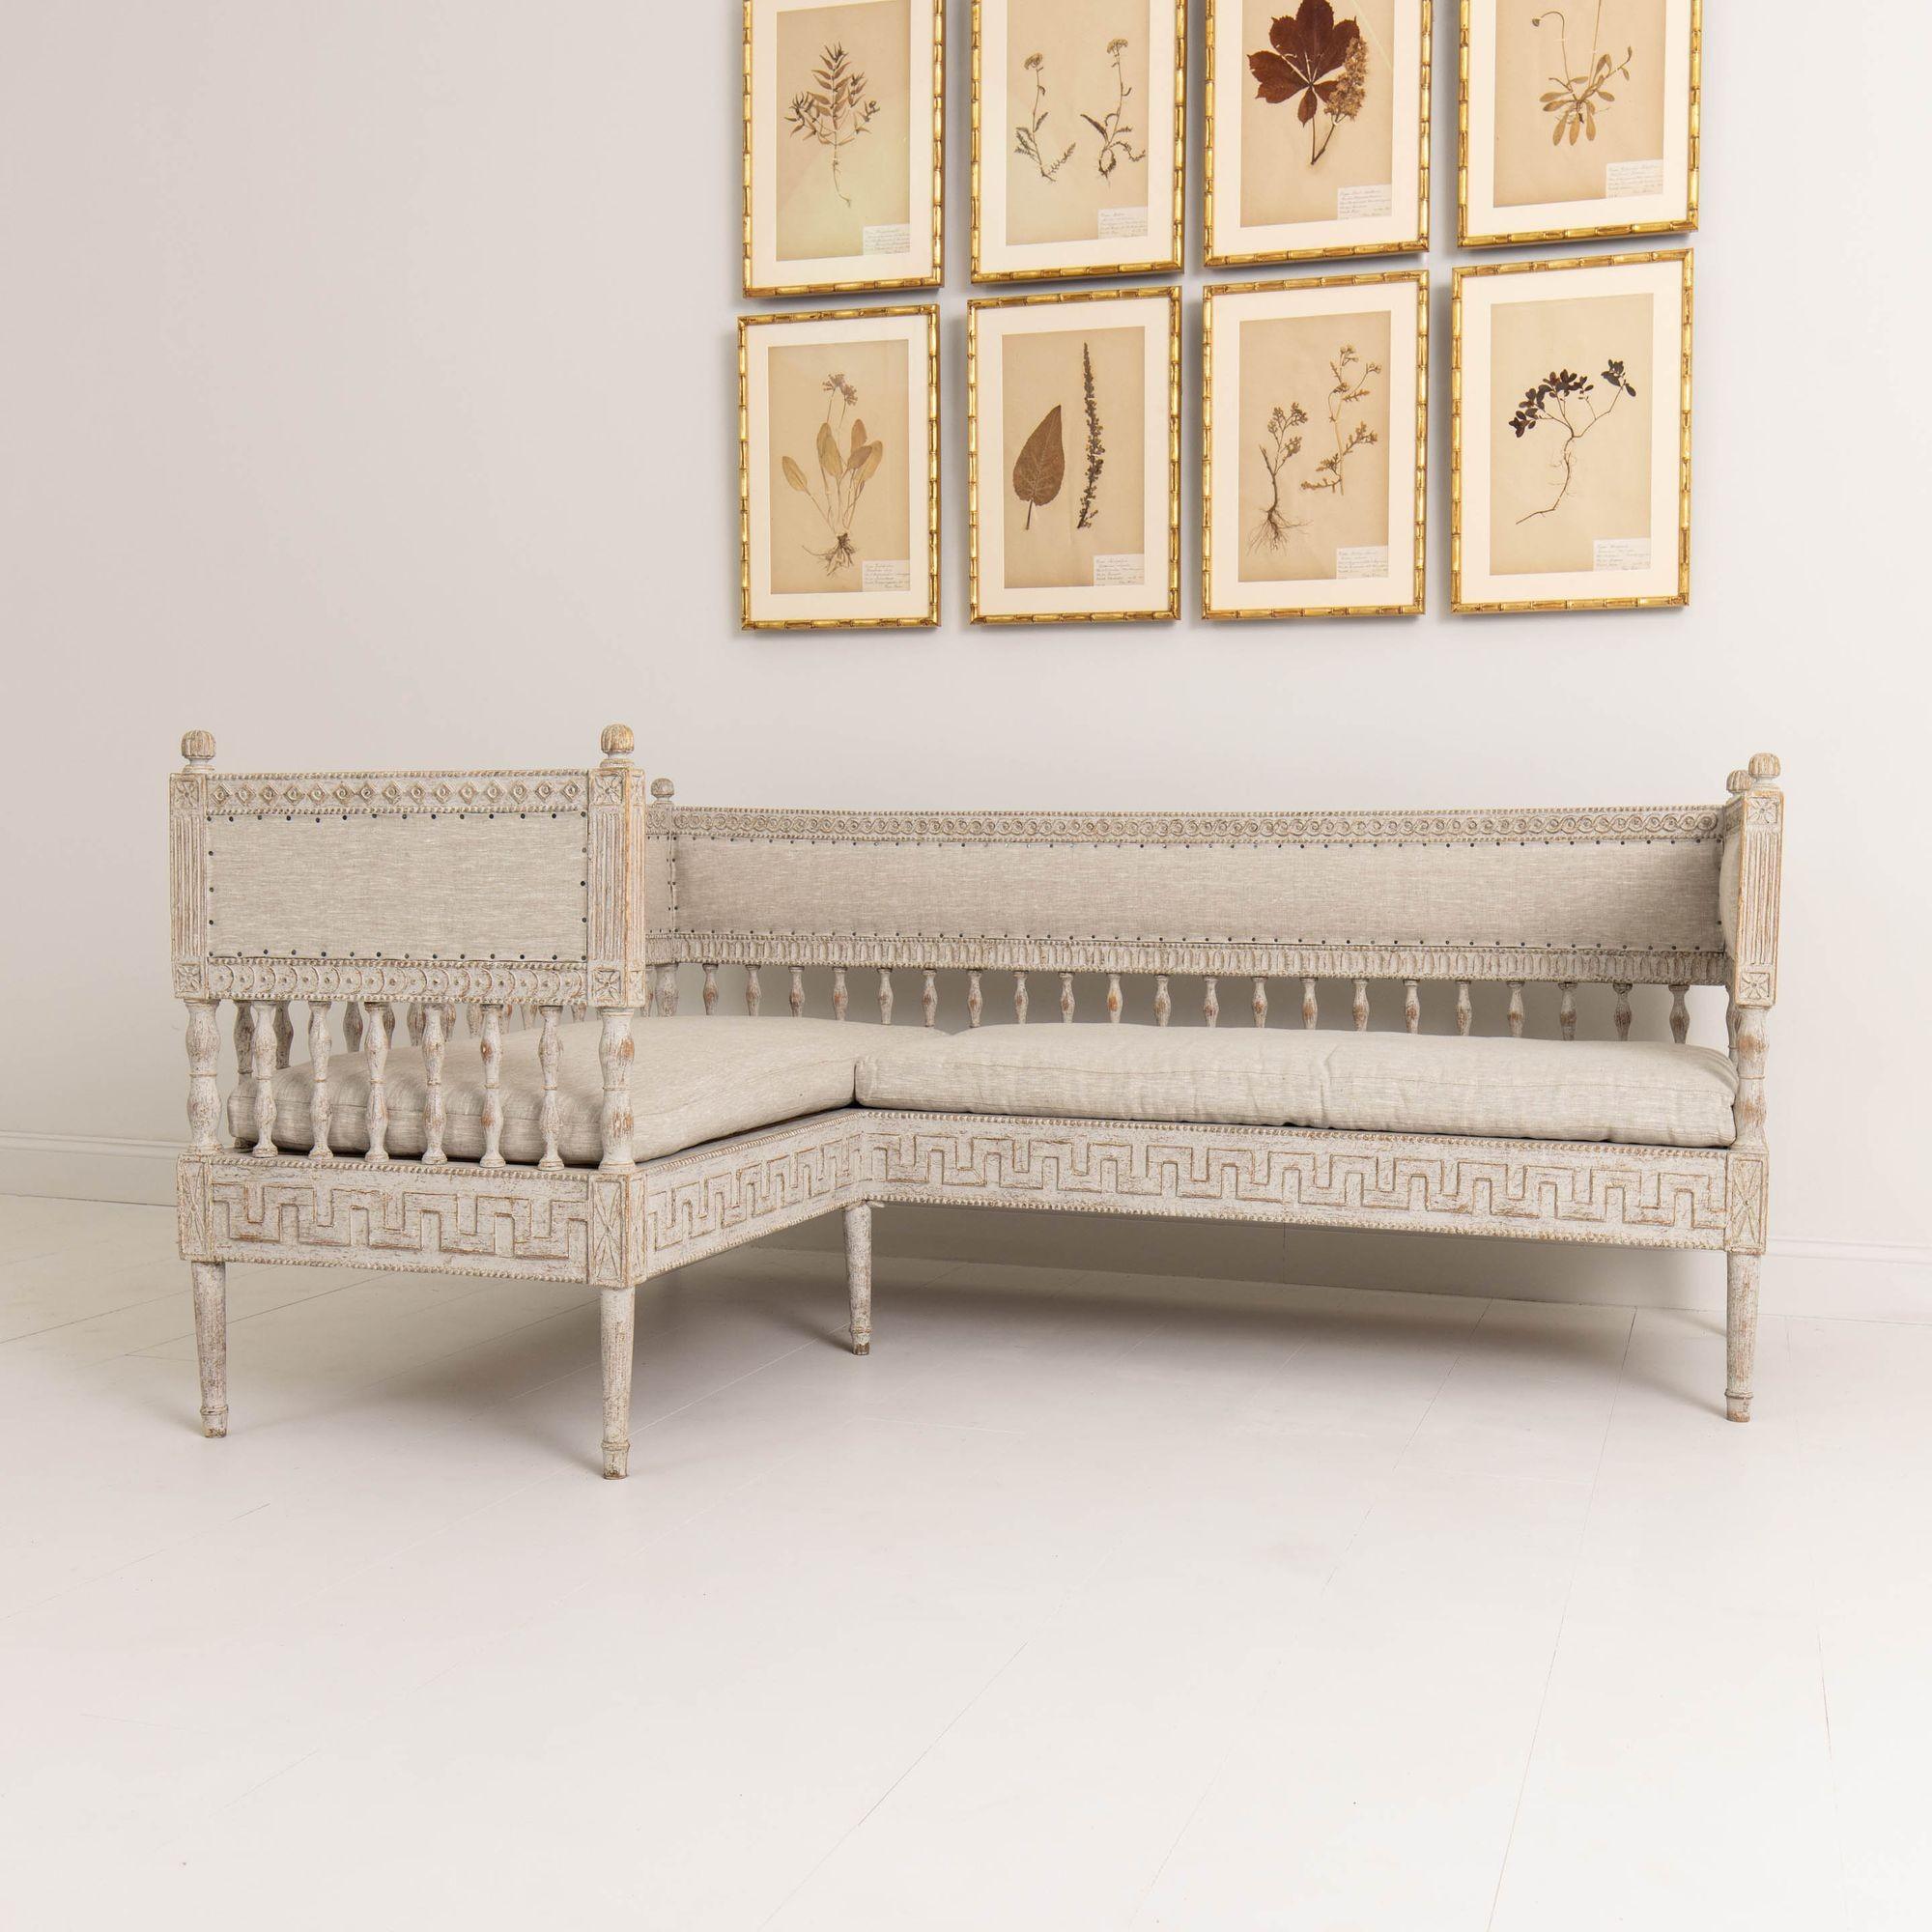 A rare period Gustavian corner banquette, profusely carved with unique variation of wood decor that is different on the inside and outside of the sofa, circa 1790. Newly upholstered in linen with nail head trim. Finished on all sides. A firm Maison